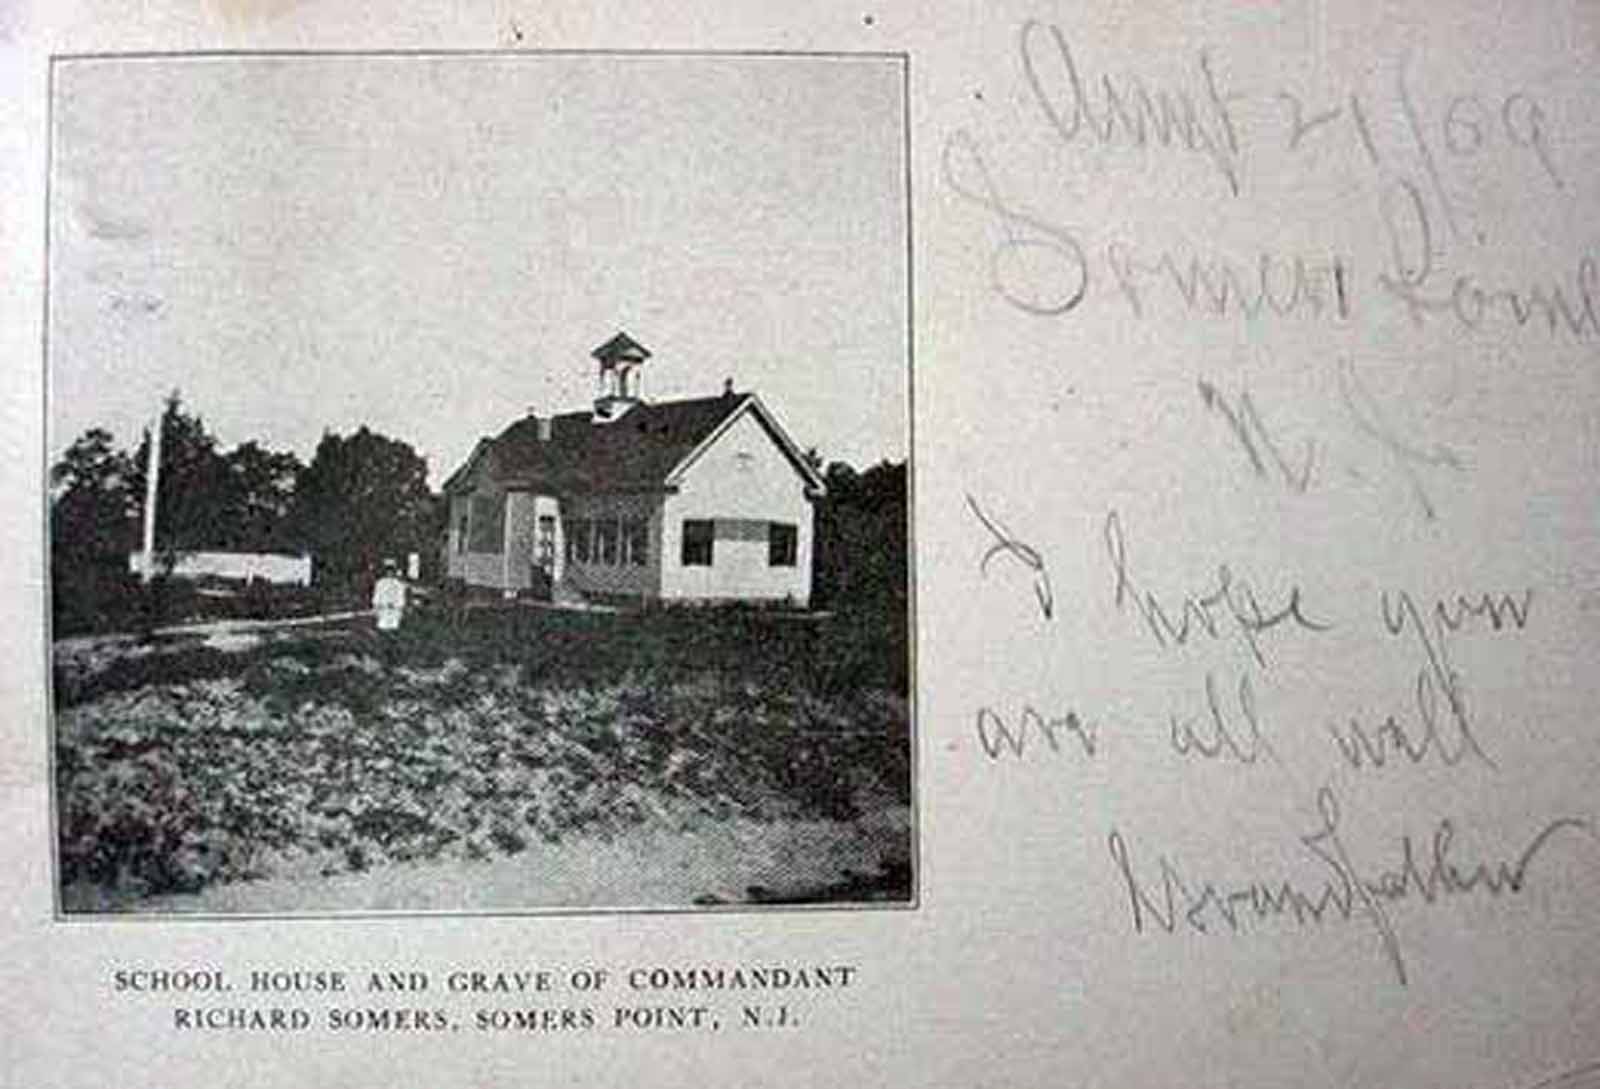 Somers Point - Schoolhouse and grave of Commandant Richard Somers - c 1910